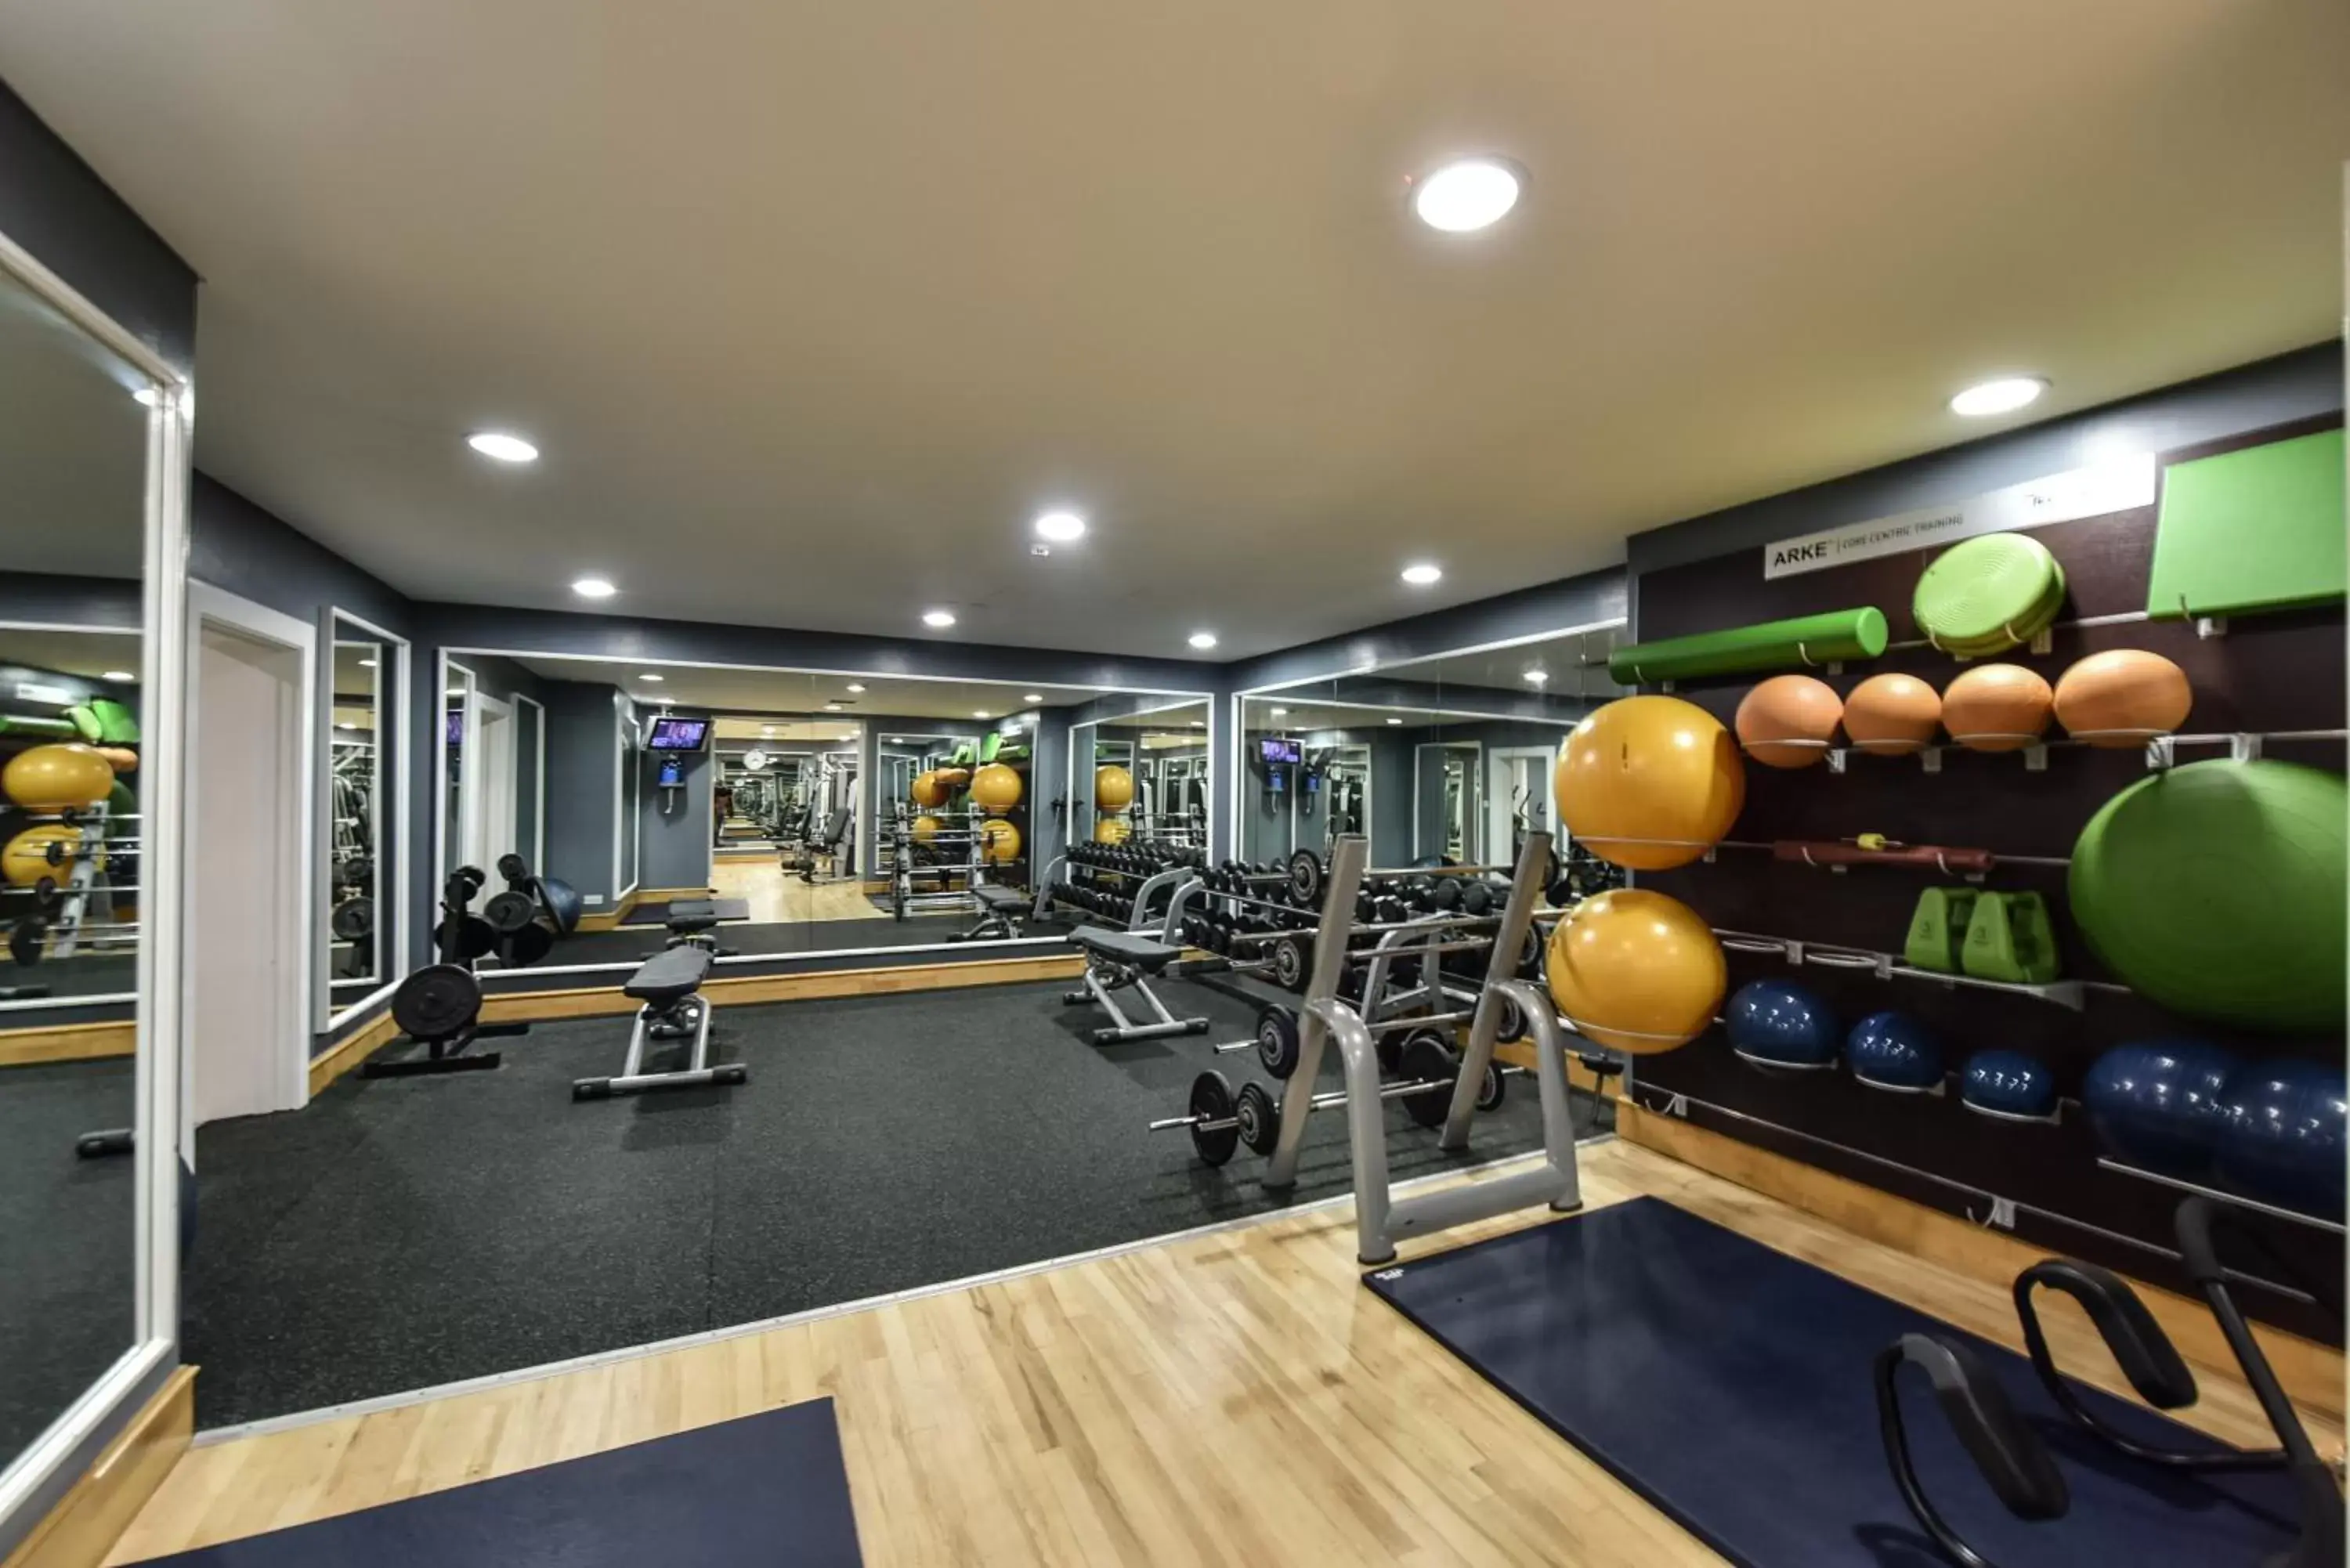 Fitness centre/facilities, Fitness Center/Facilities in The Balmoral Hotel